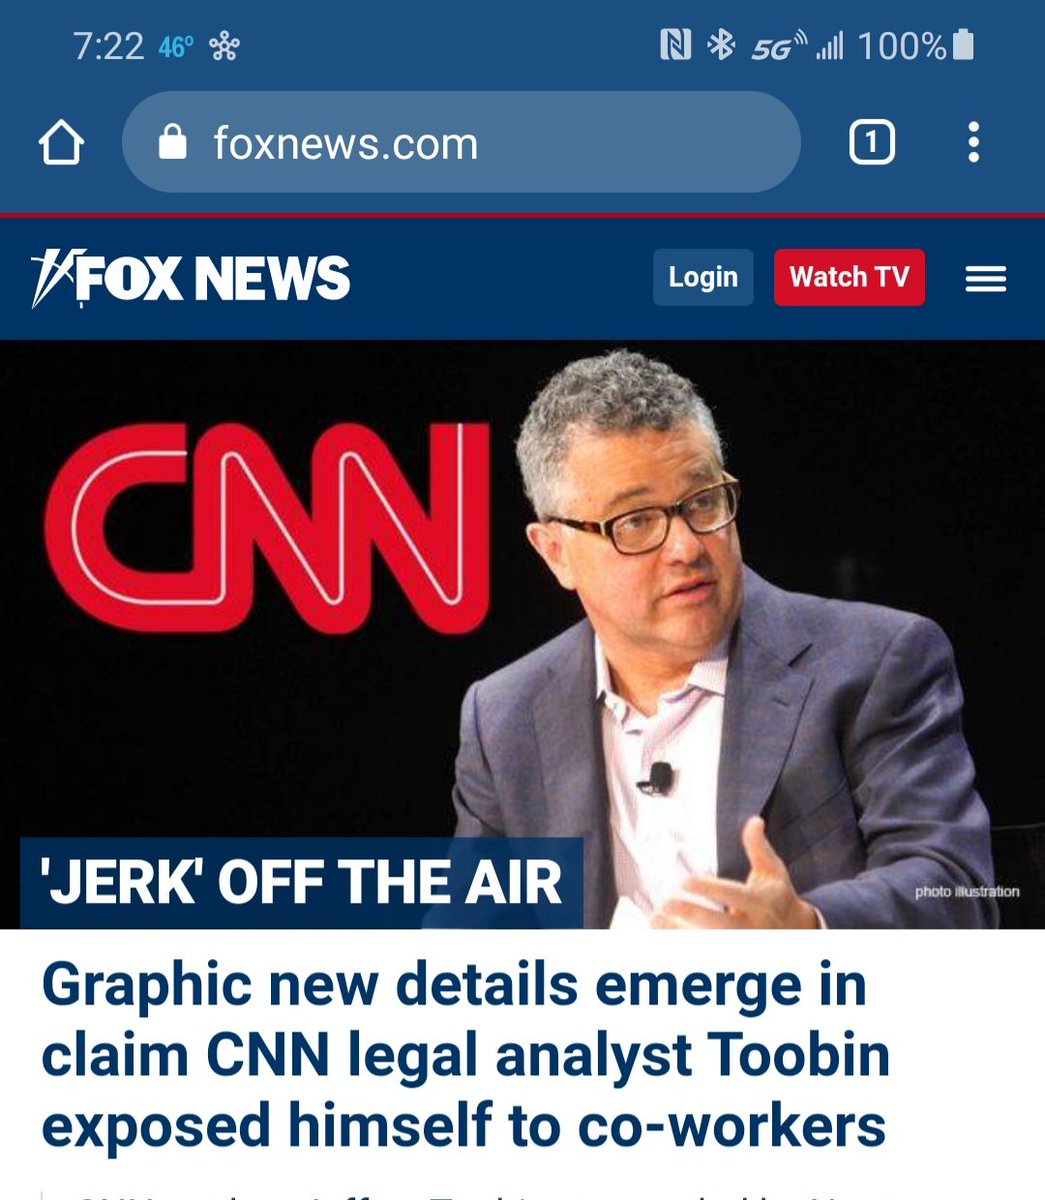 cnn chile - 46 genoeg N 5G 100% A foxnews.com 1 Fox News Login Watch Tv Cn 'Jerk Off The Air photo illustration Graphic new details emerge in claim Cnn legal analyst Toobin exposed himself to coworkers